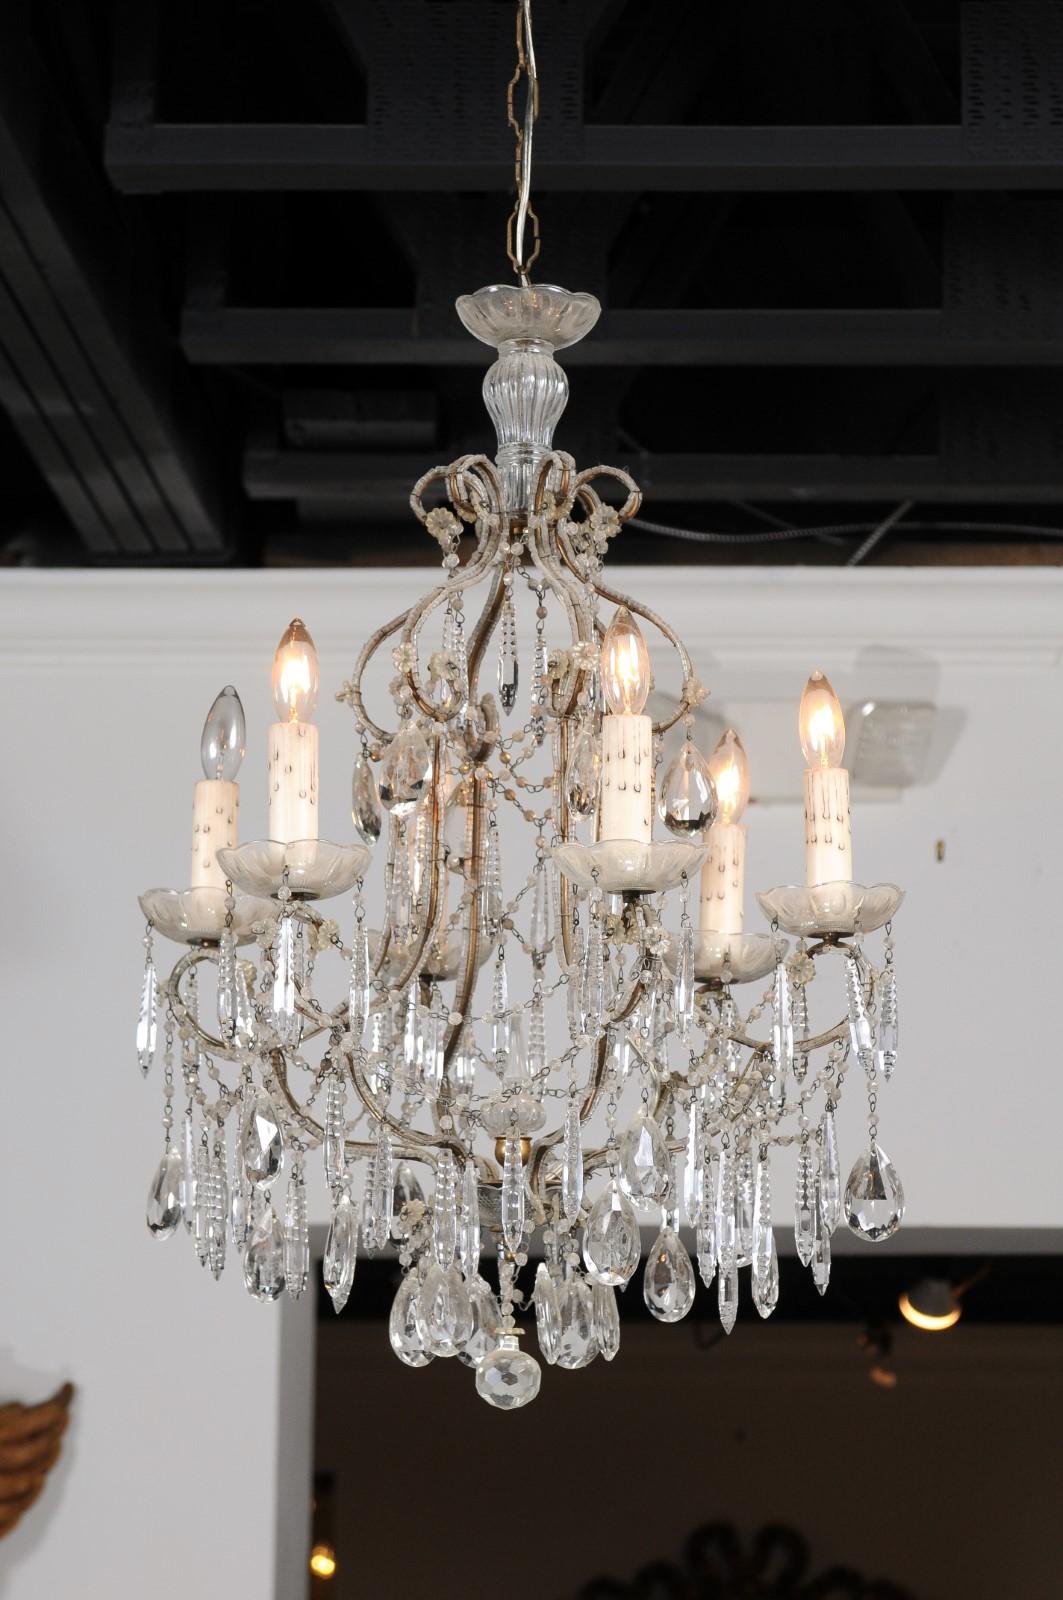 Italian 19th Century Six-Light Chandelier with Beaded Arms and Spear Crystals For Sale 5